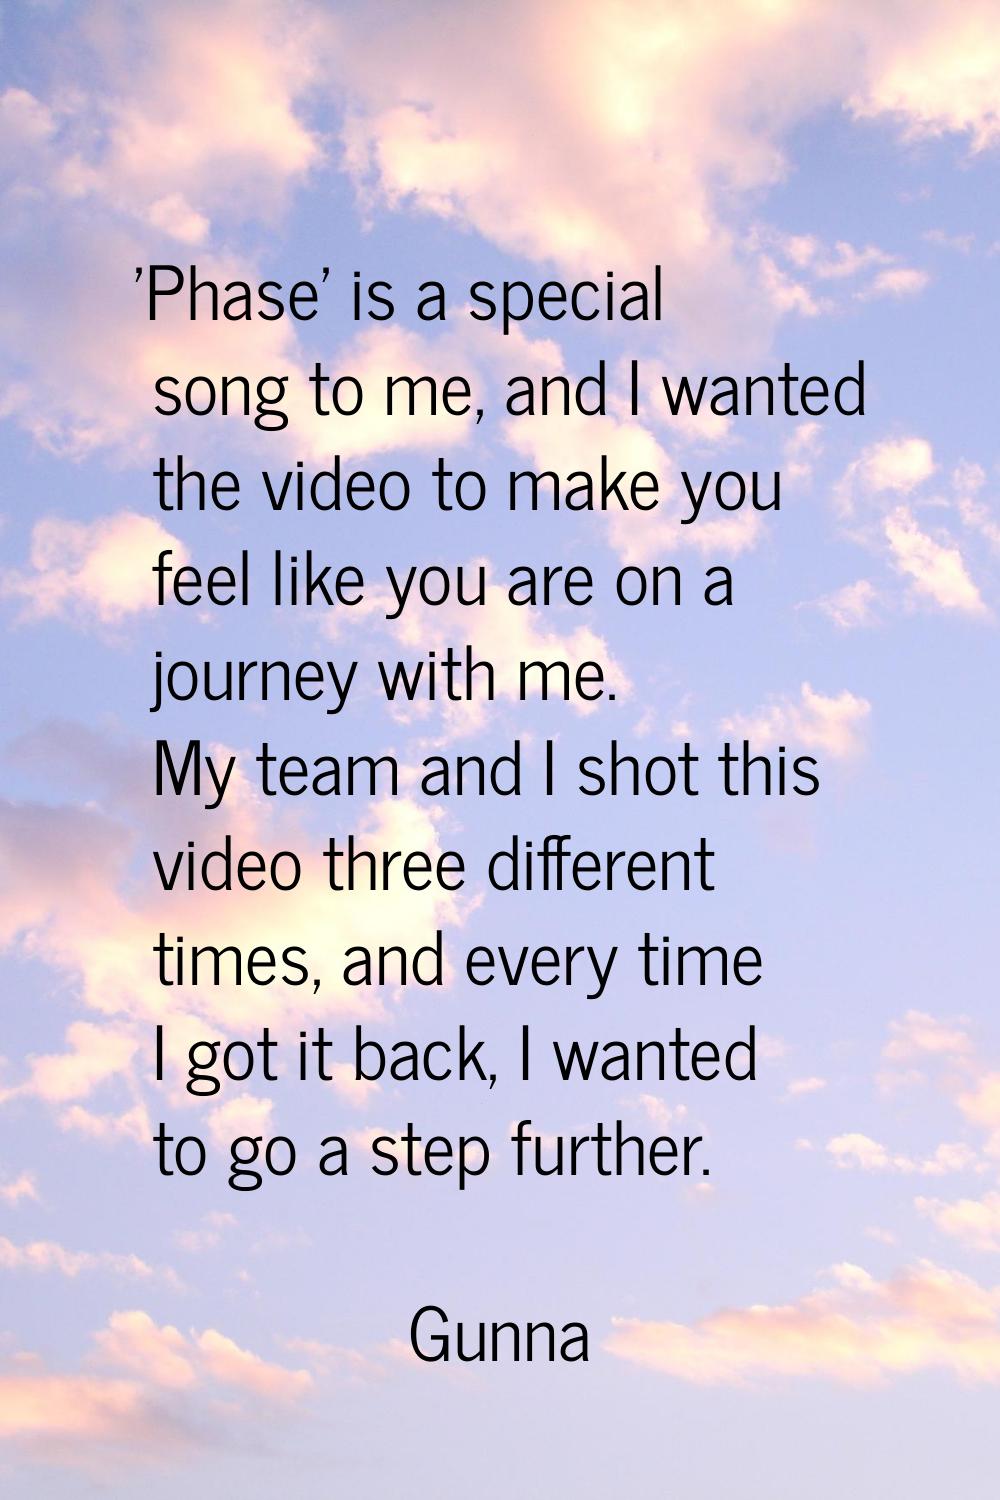 'Phase' is a special song to me, and I wanted the video to make you feel like you are on a journey 